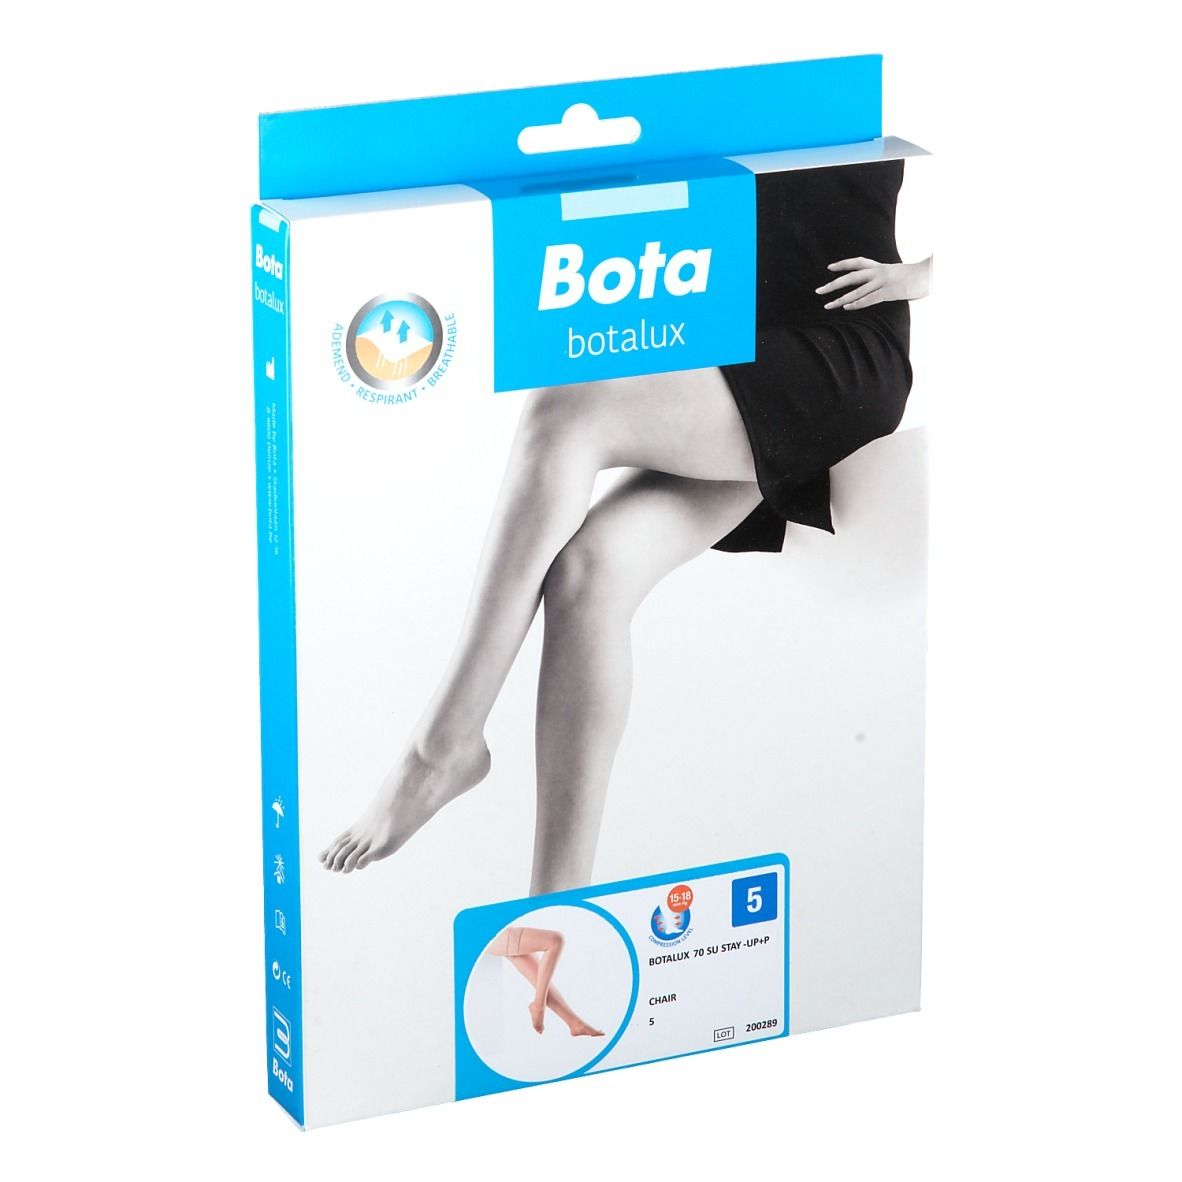 Bota Botalux 70 SU +P Chair Taille 5